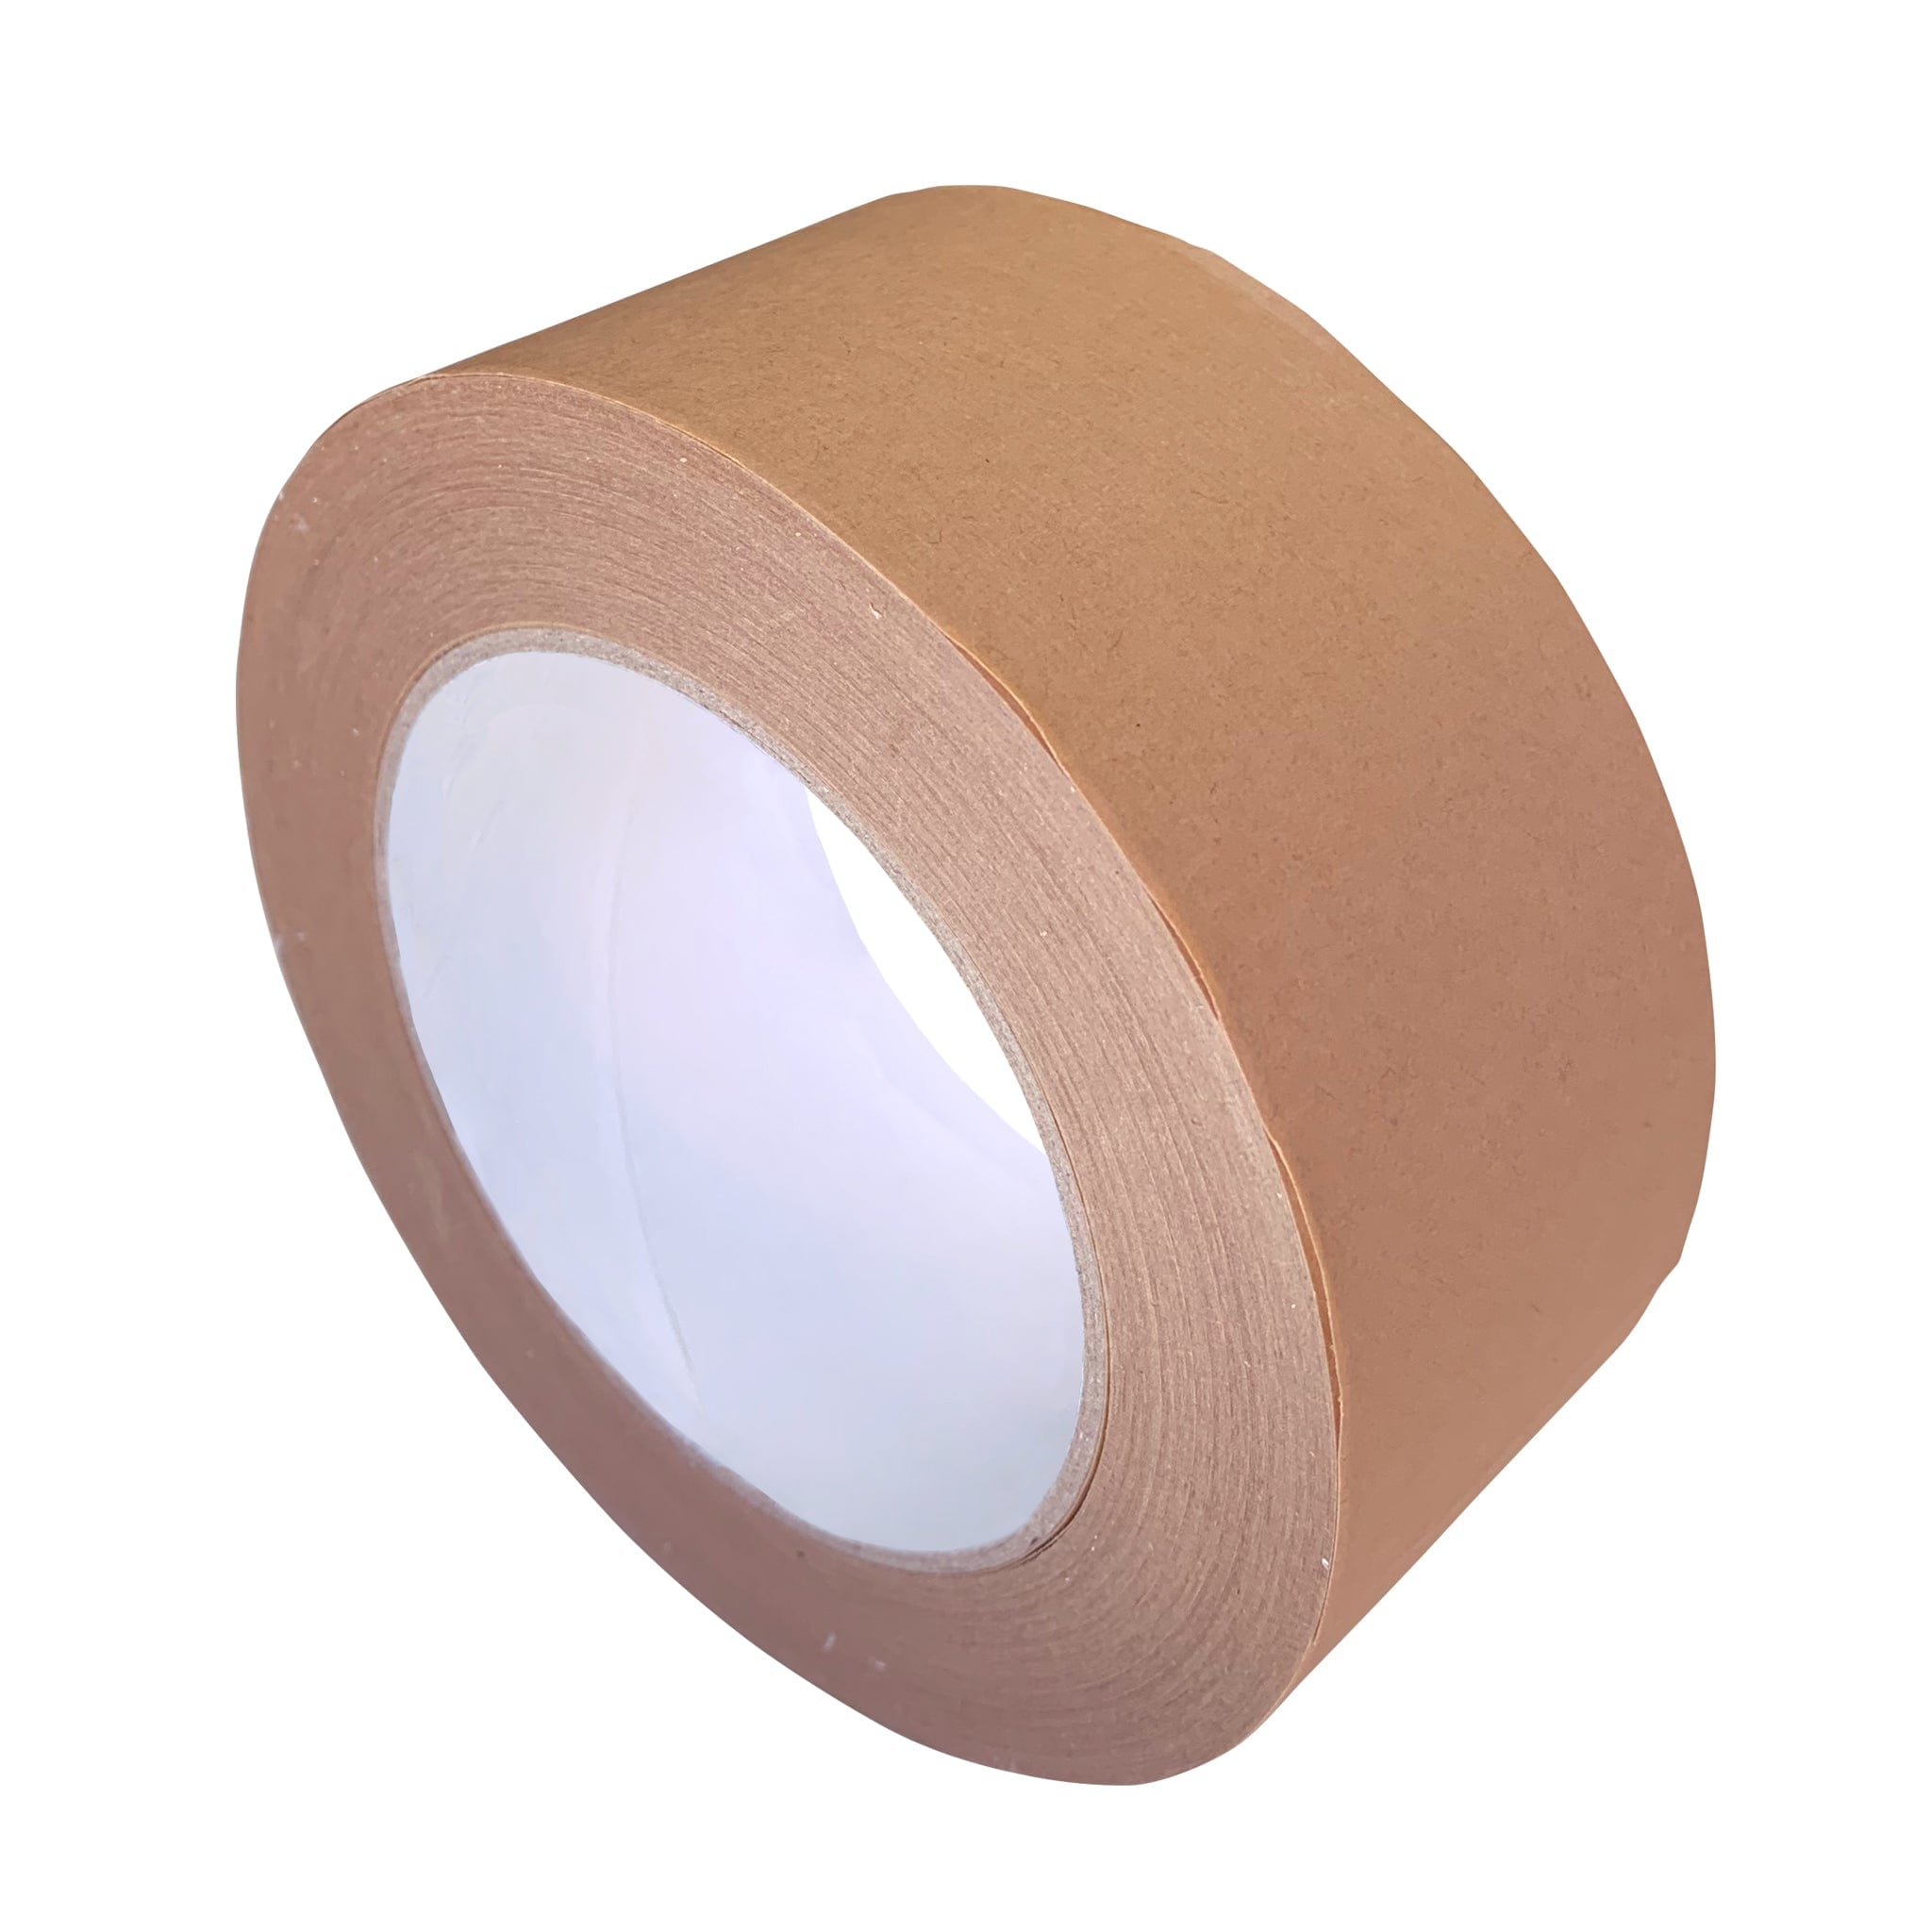 Brown Kraft Eco Tape is made from FSC certified paper